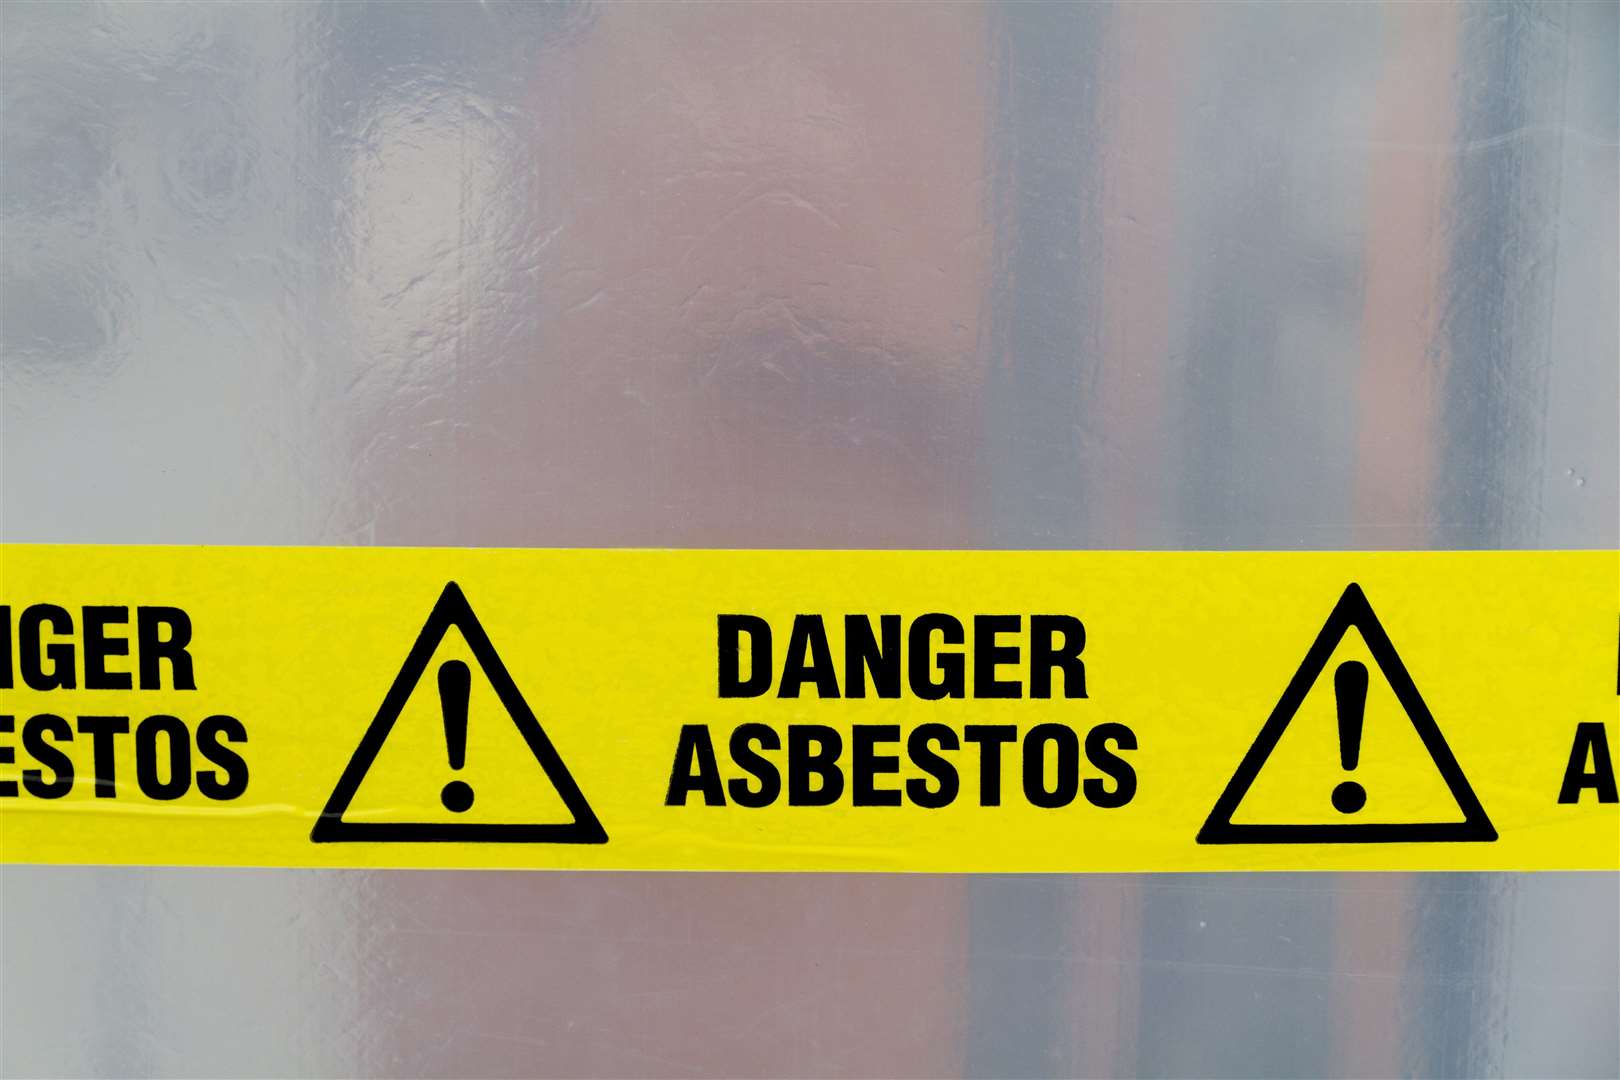 David died from mesothelioma, a cancer often caused by asbestos